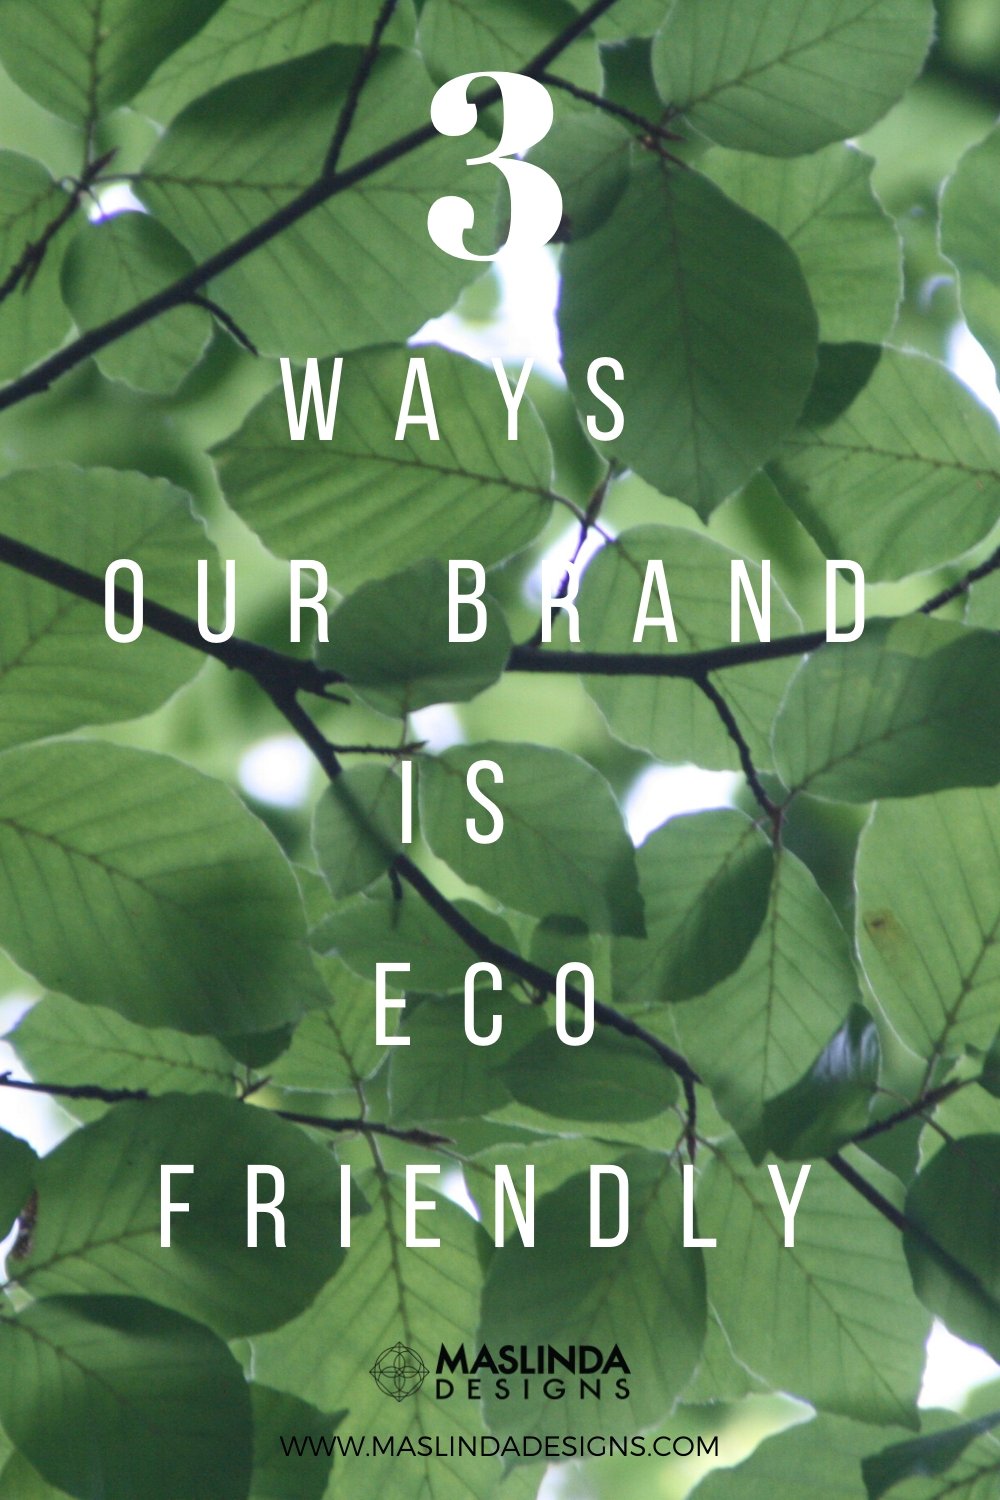 3 ways our brand is eco friendly 🌱 - Maslinda Designs